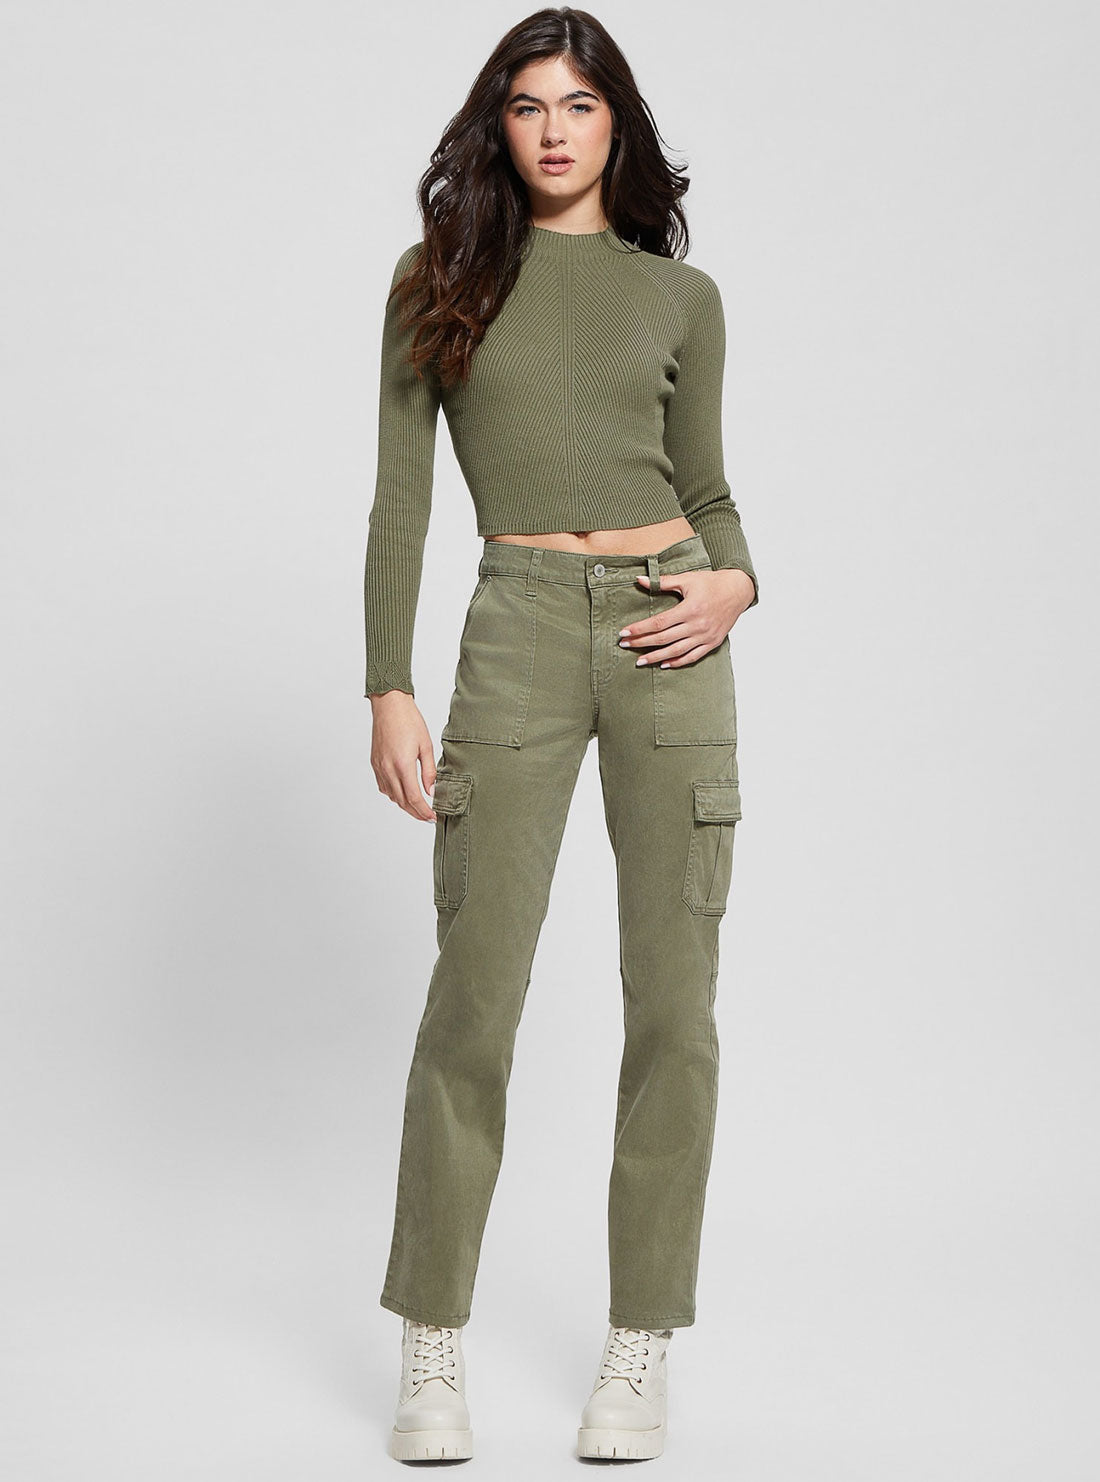 GUESS Green Straight-Leg Cargo Pants full view